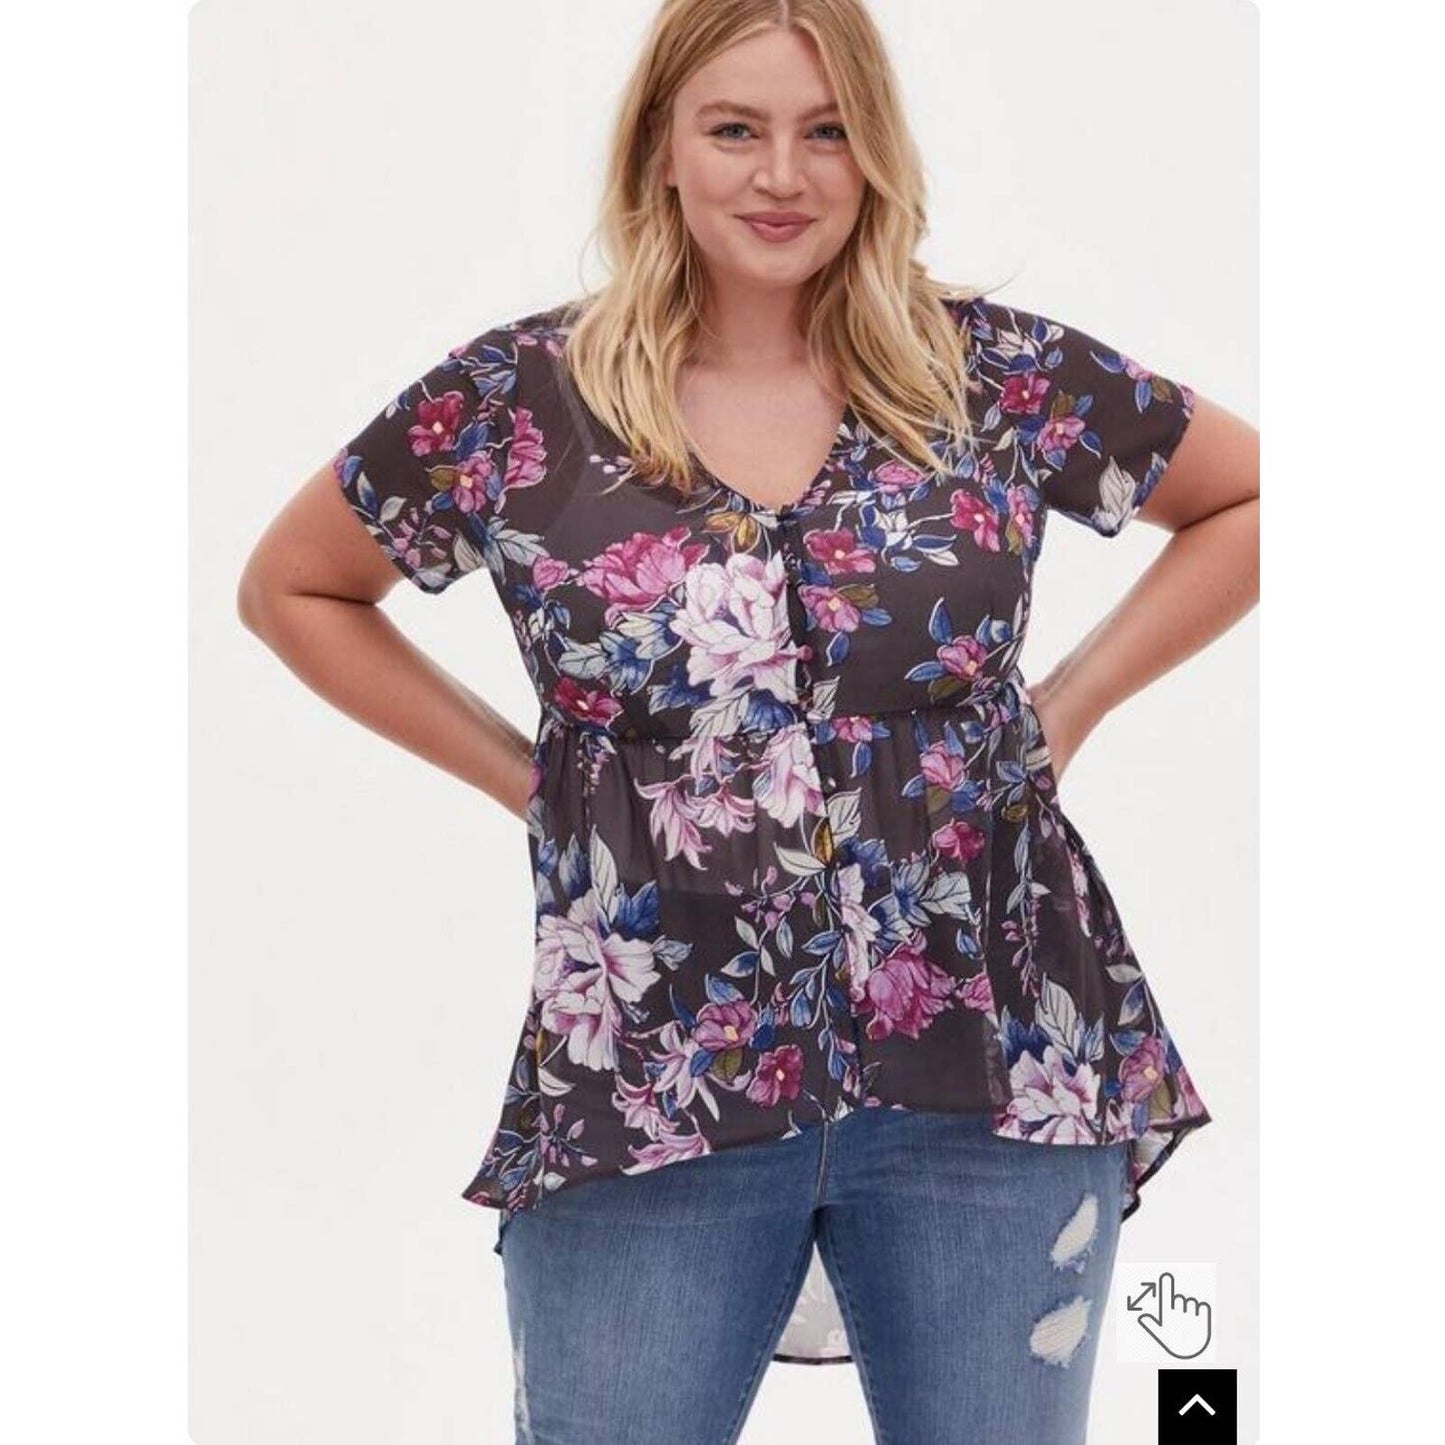 Torrid Babydoll Blouse Top Gray Floral Chiffon Button Front High Low Size 2 2X